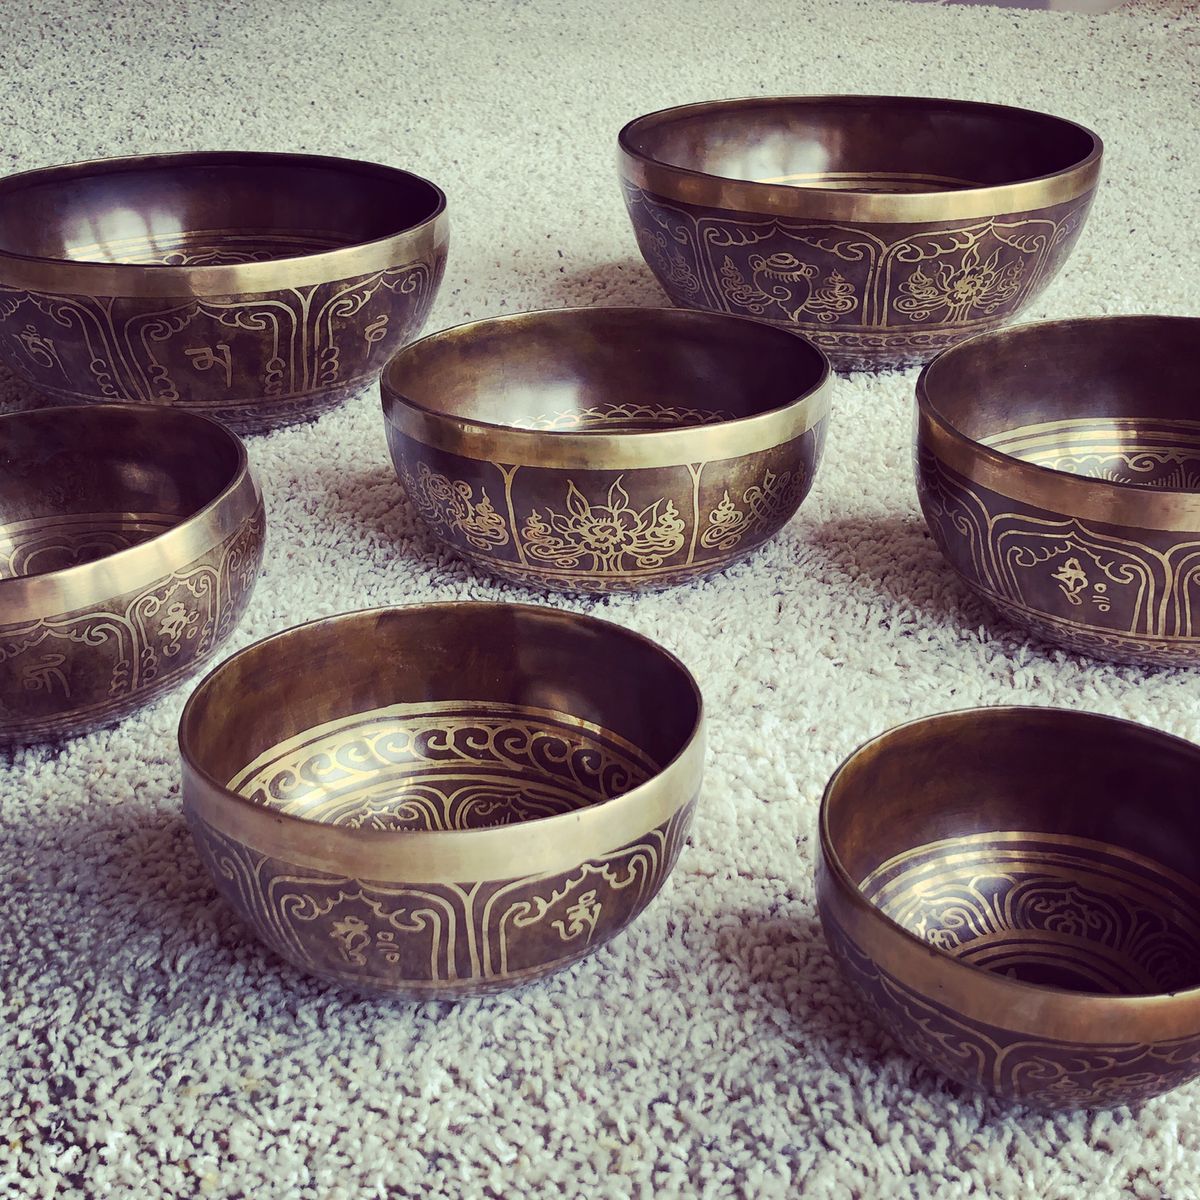 Introduction to Sound Therapy with Himalayan Singing Bowls - 2 Day Intensive Course